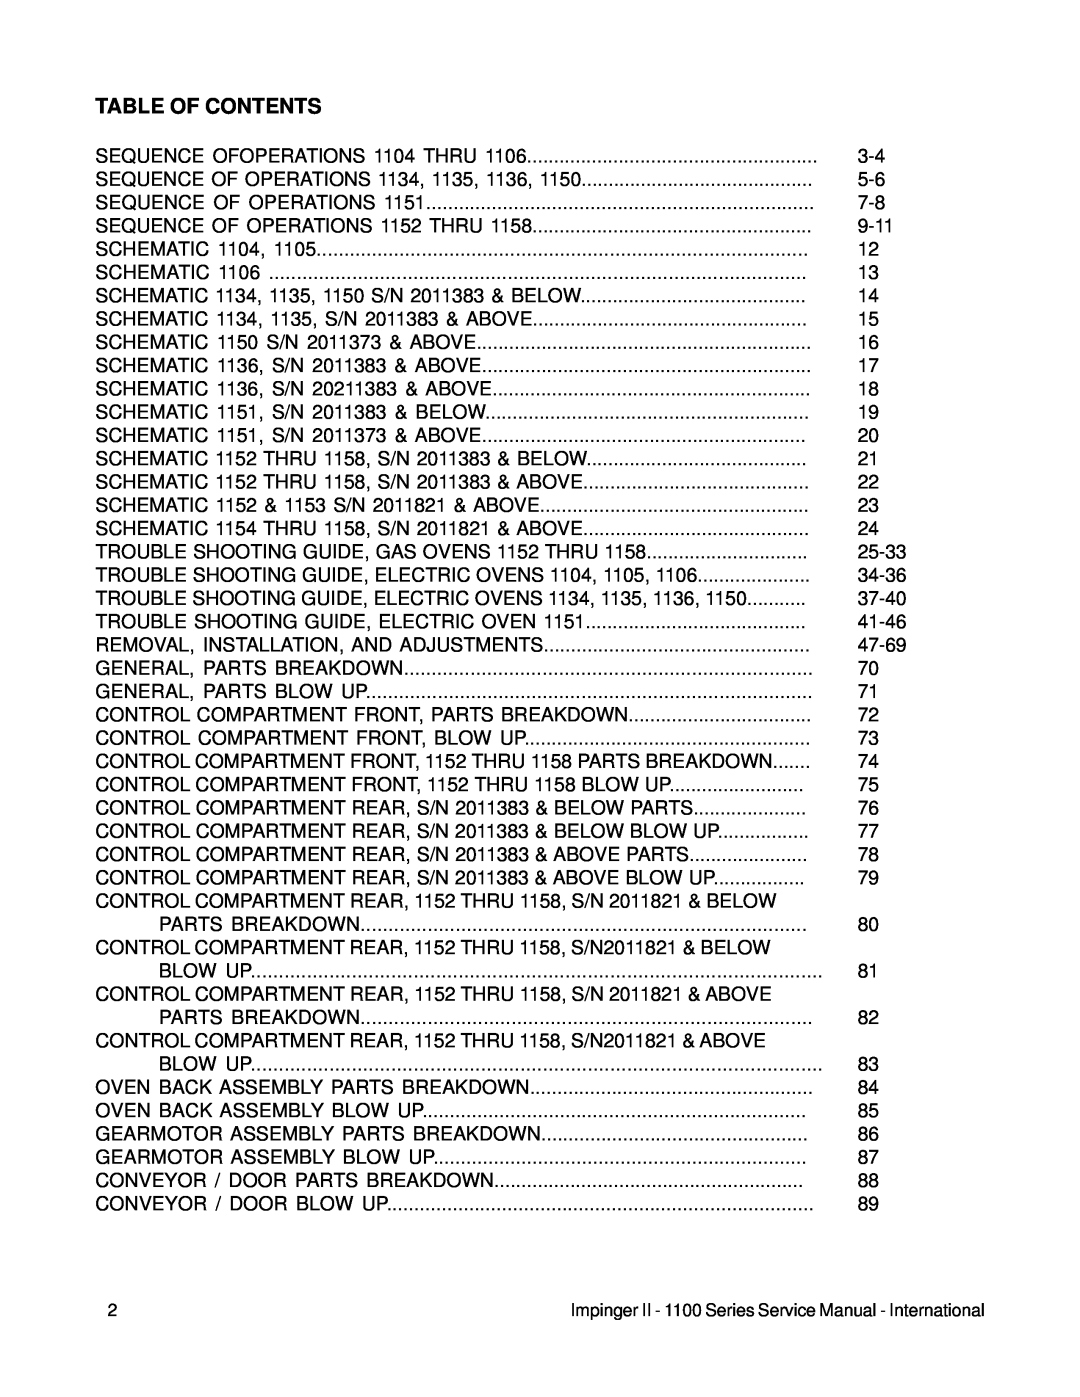 Lincoln 1100 Series service manual Table Of Contents 